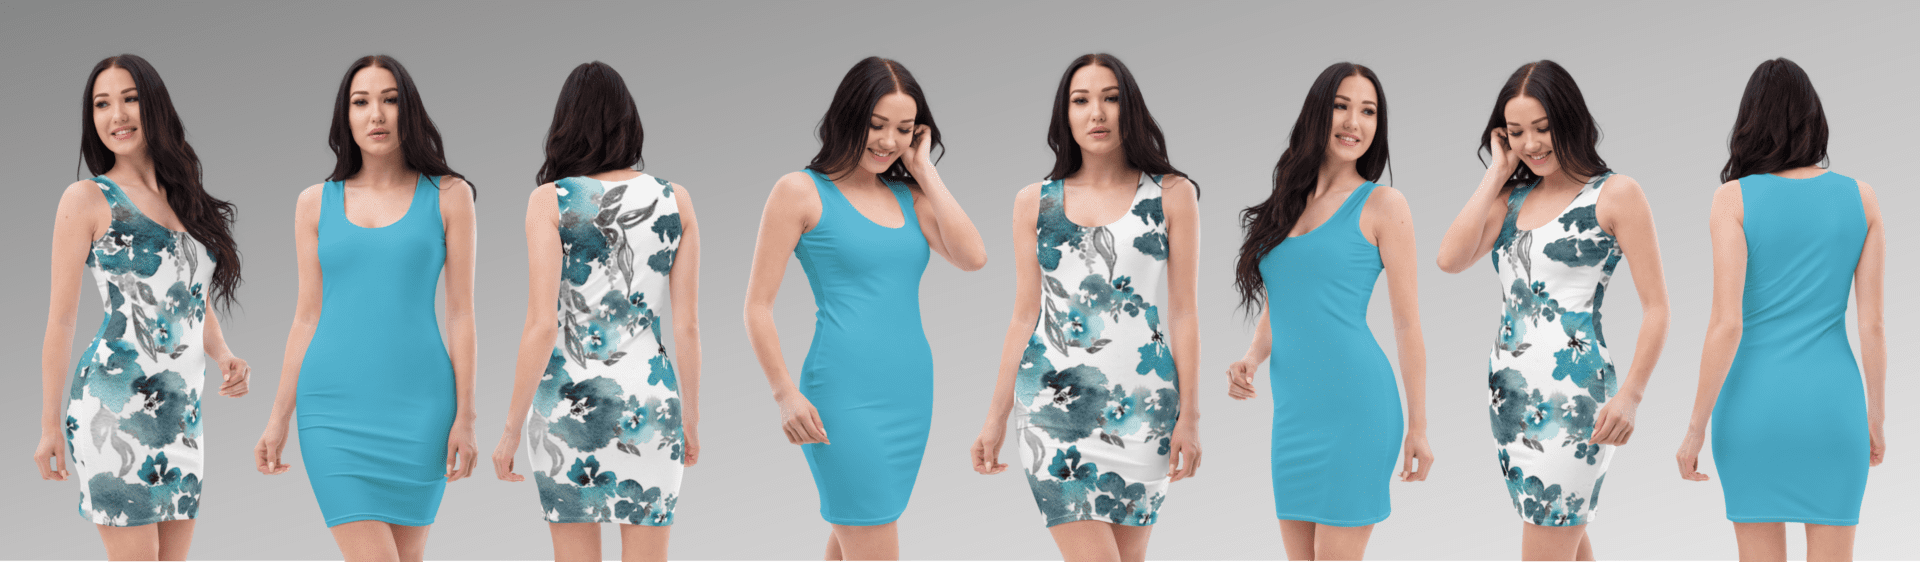 Women modeling blue and floral dresses.